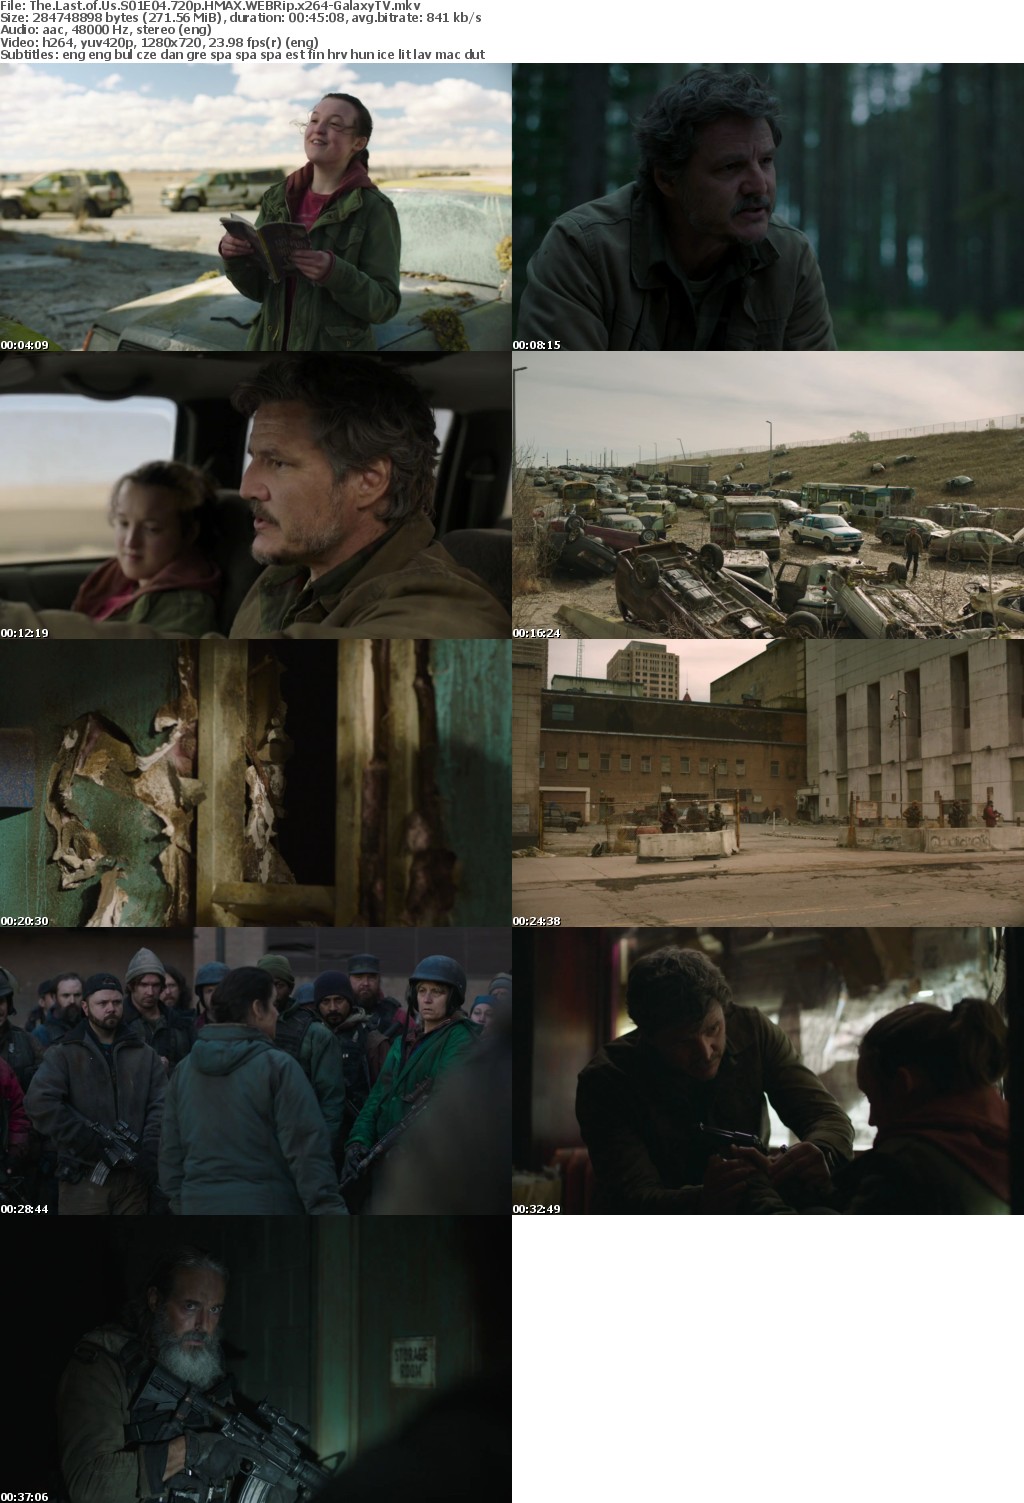 The Last of Us S01 COMPLETE 720p HMAX WEBRip x264-GalaxyTV